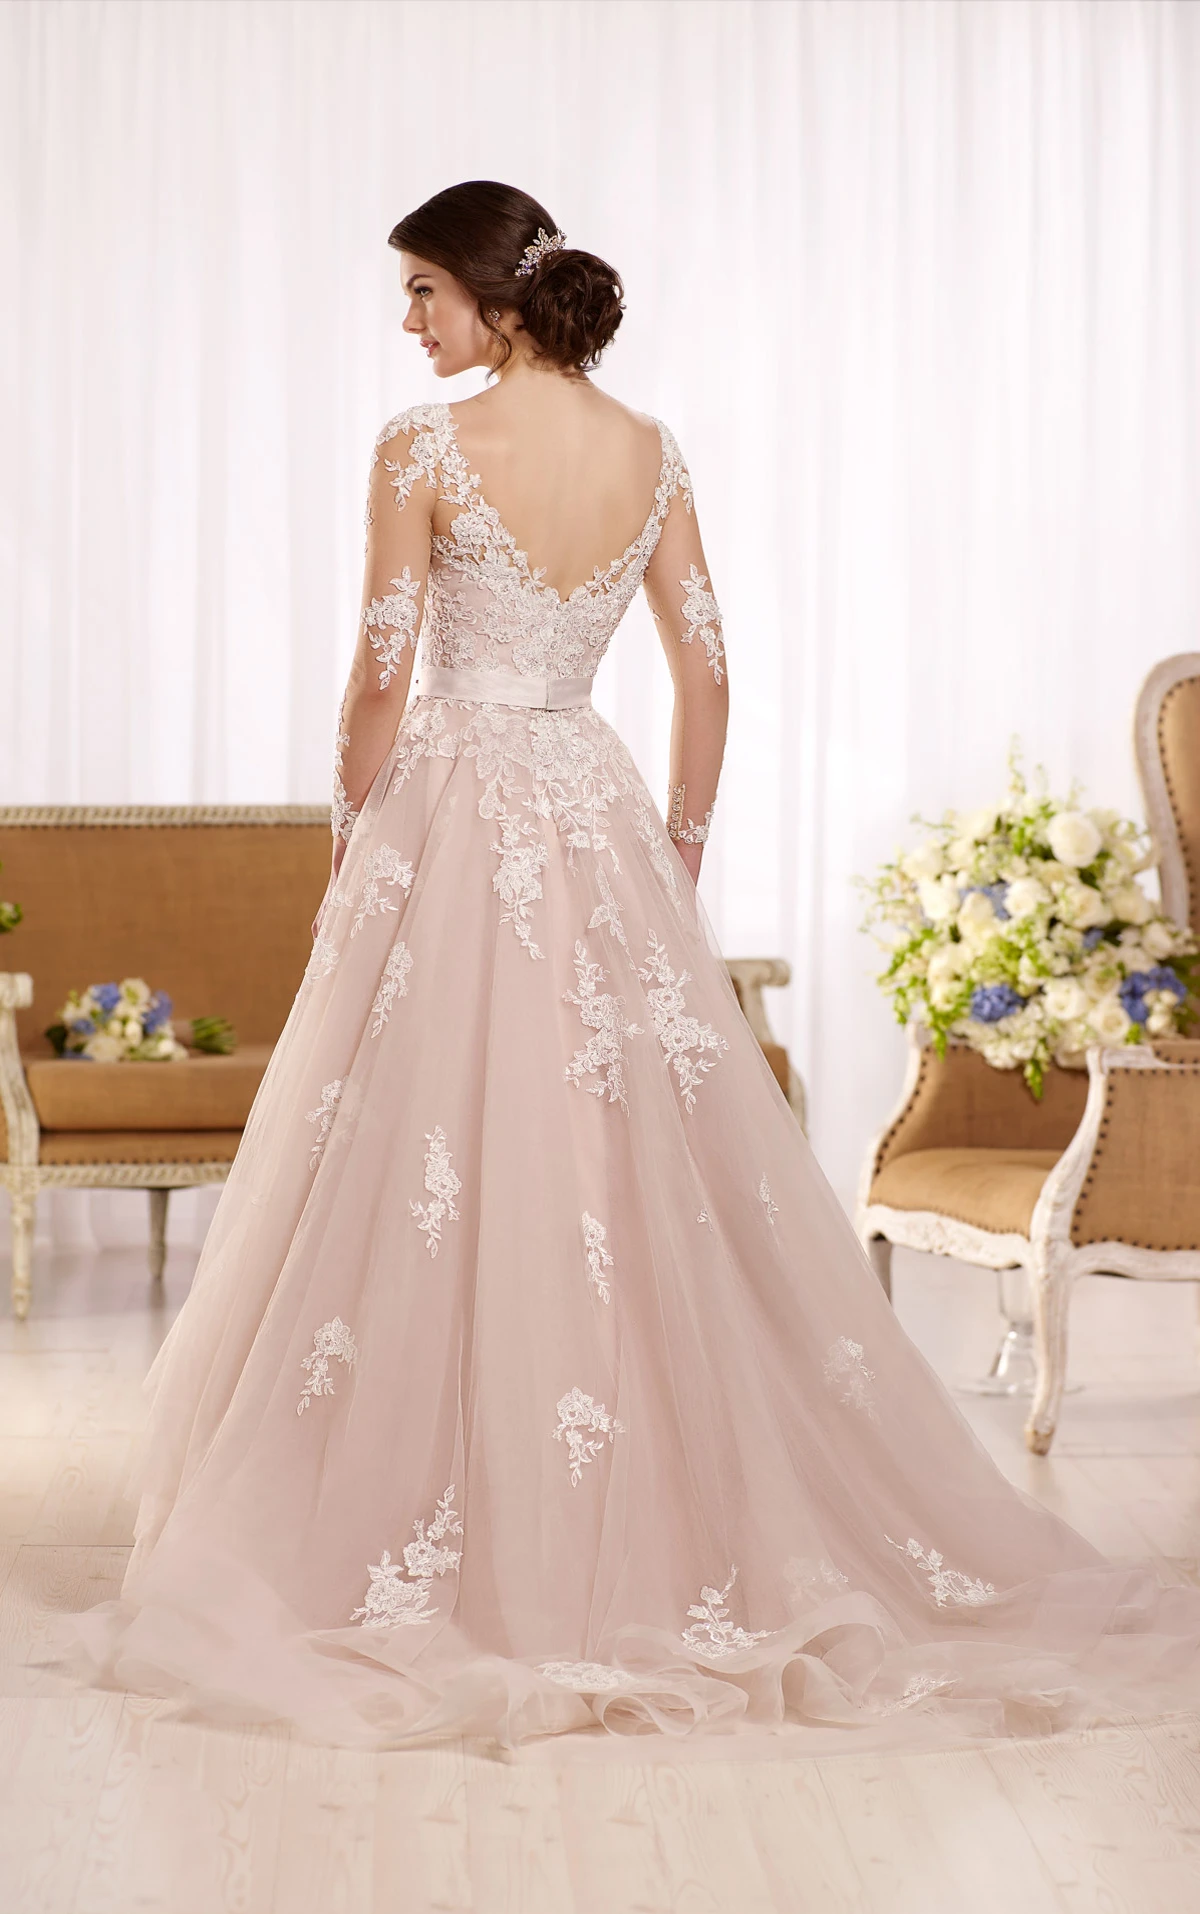 Plus Size Wedding Dress with Long Sleeves Essense of